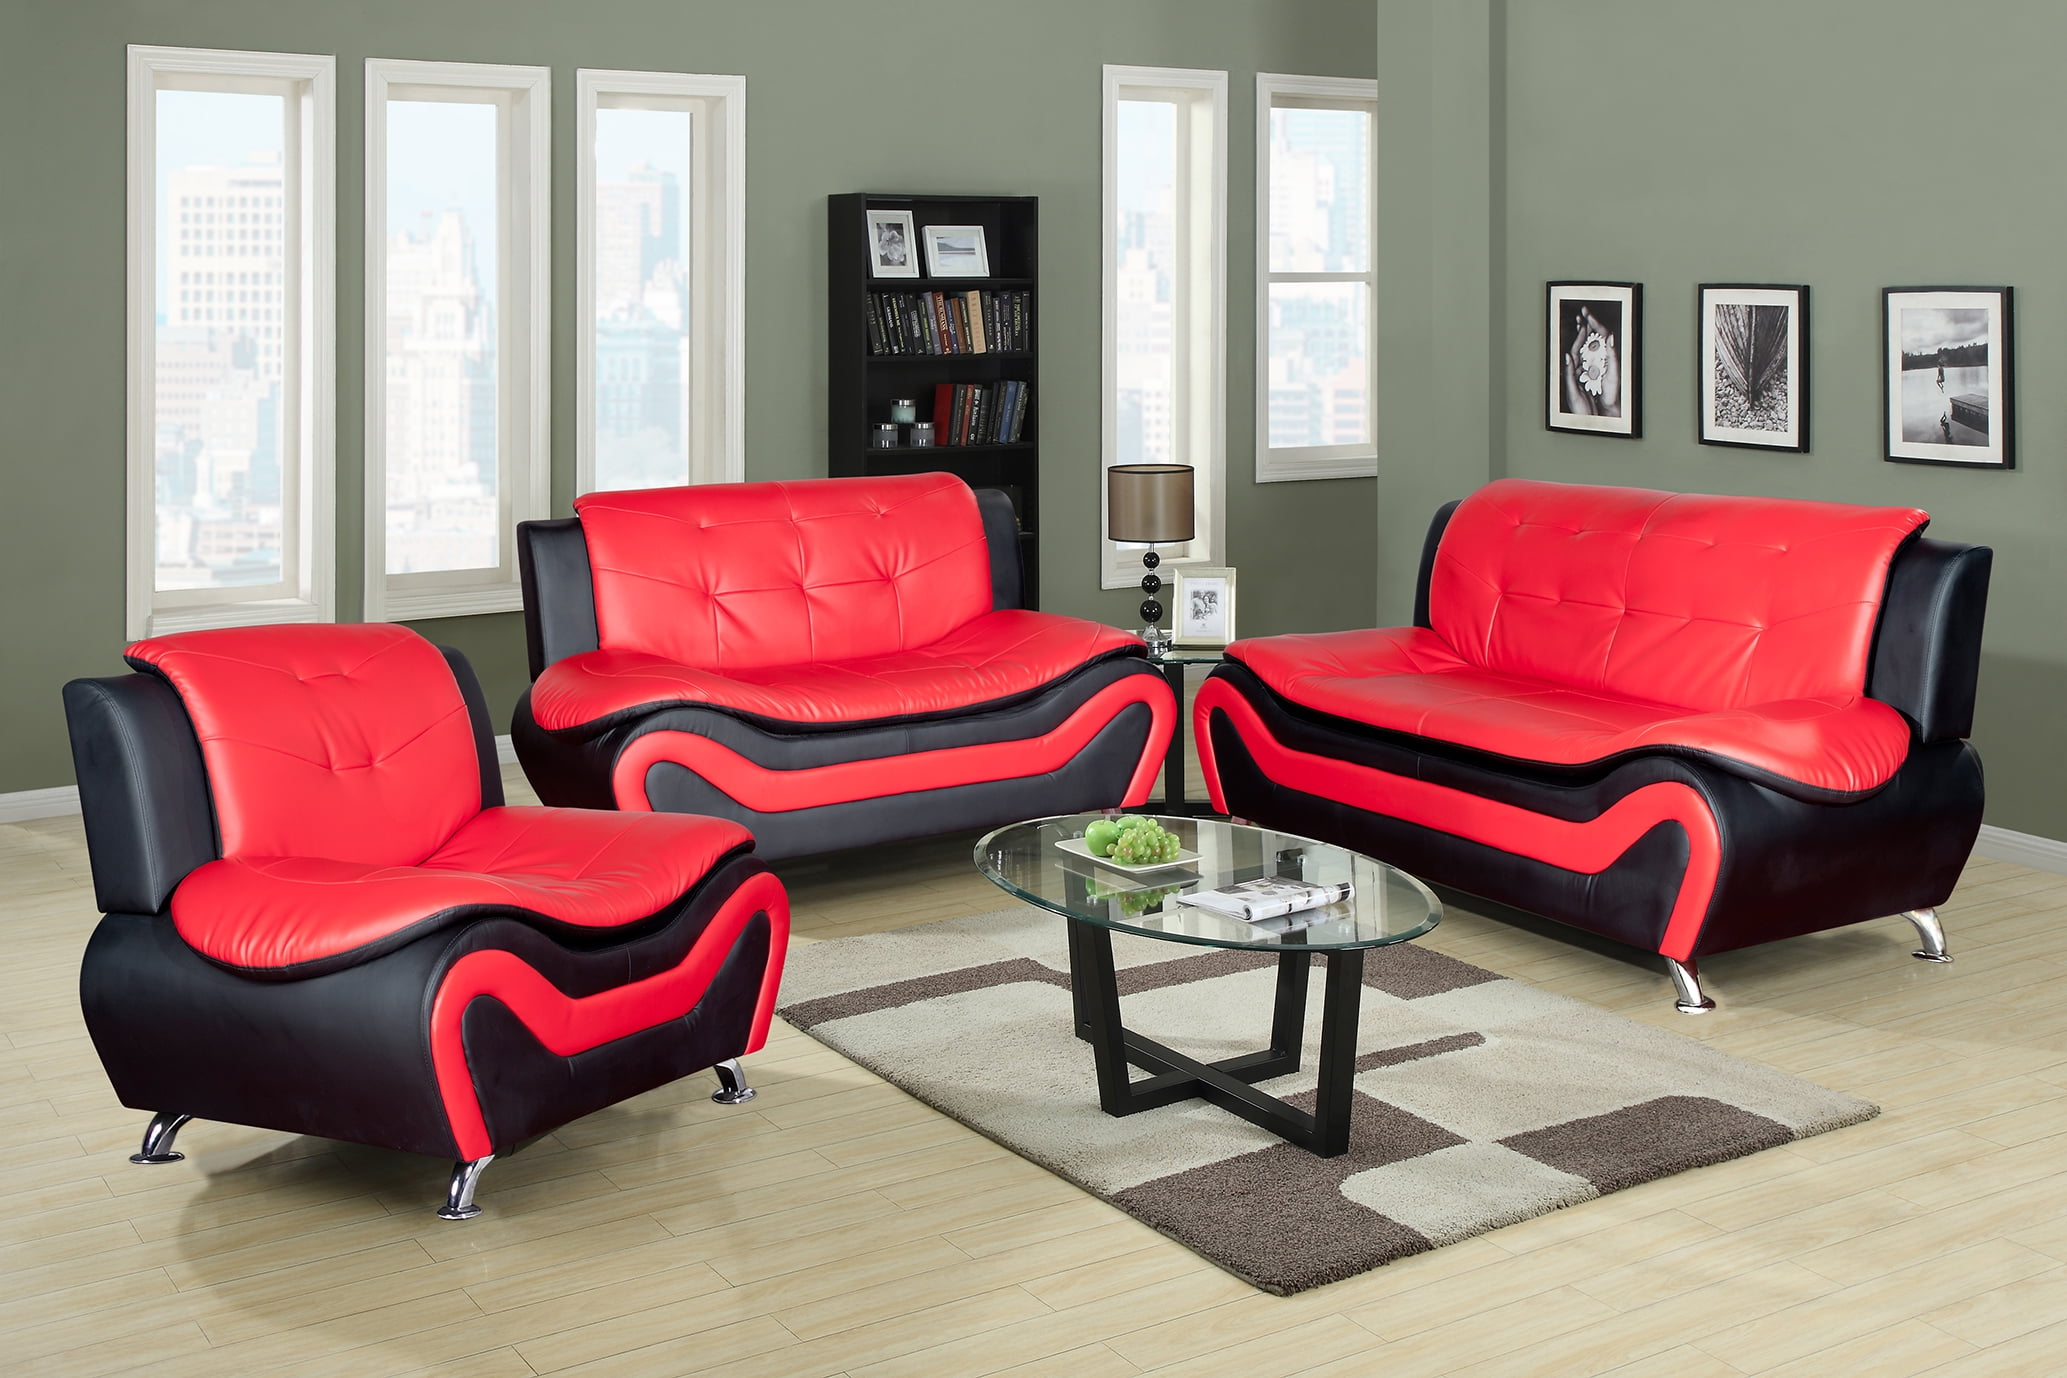 Sofa Loveseat Chair, Red And Black Leather Living Room Set